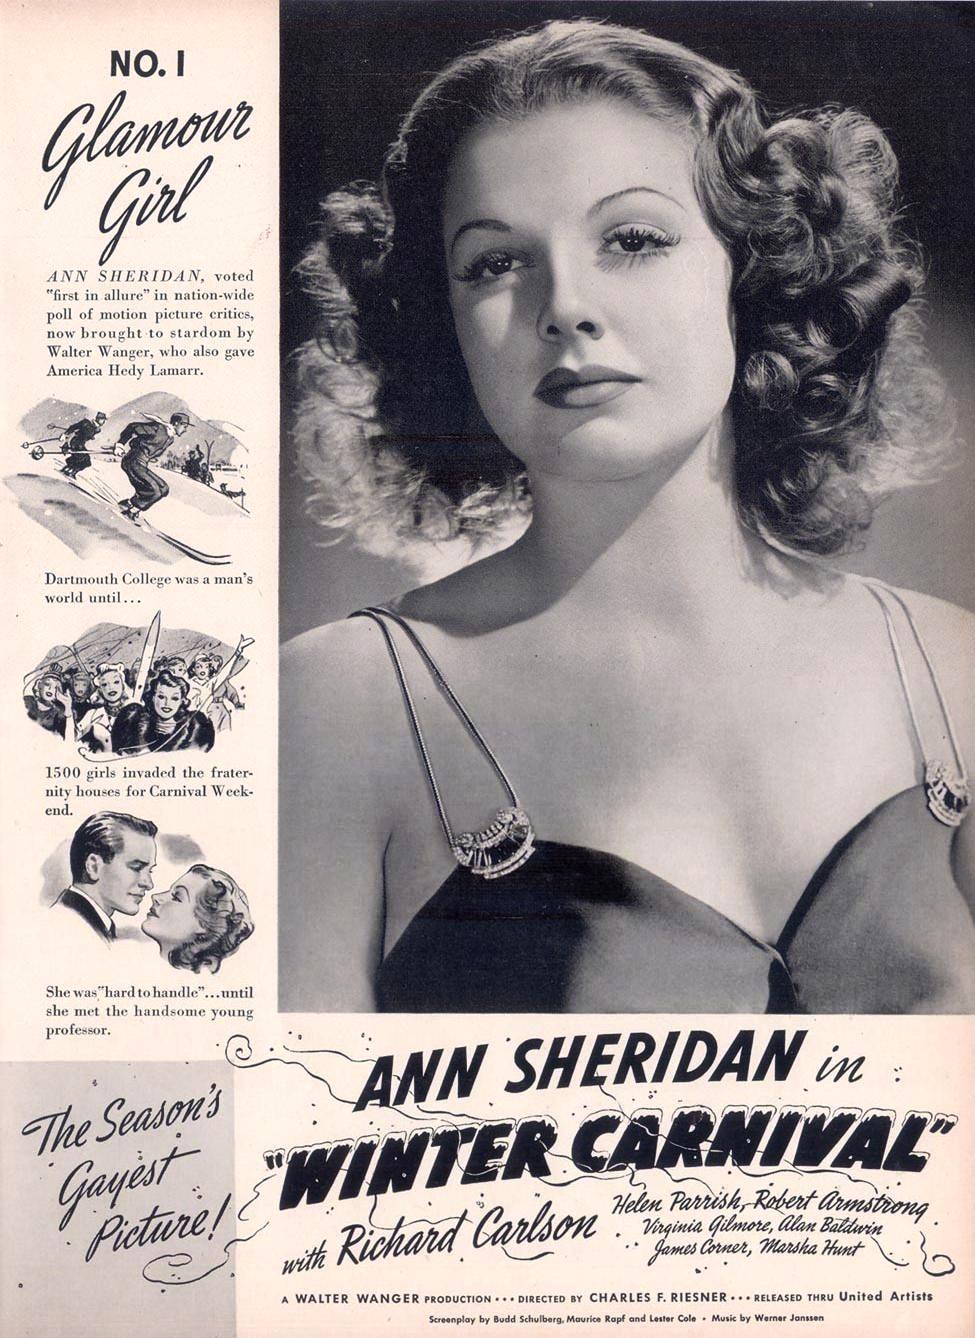 <br>Ann Sheridan in <i>Winter Carnival</i><br><br>Life; July 24, 1939.<br><br><a href=http://graphic-design.tjs-labs.com/show-picture.php?id=1190640674&size=FULL>Click here to view a full-size readable image.</a>
